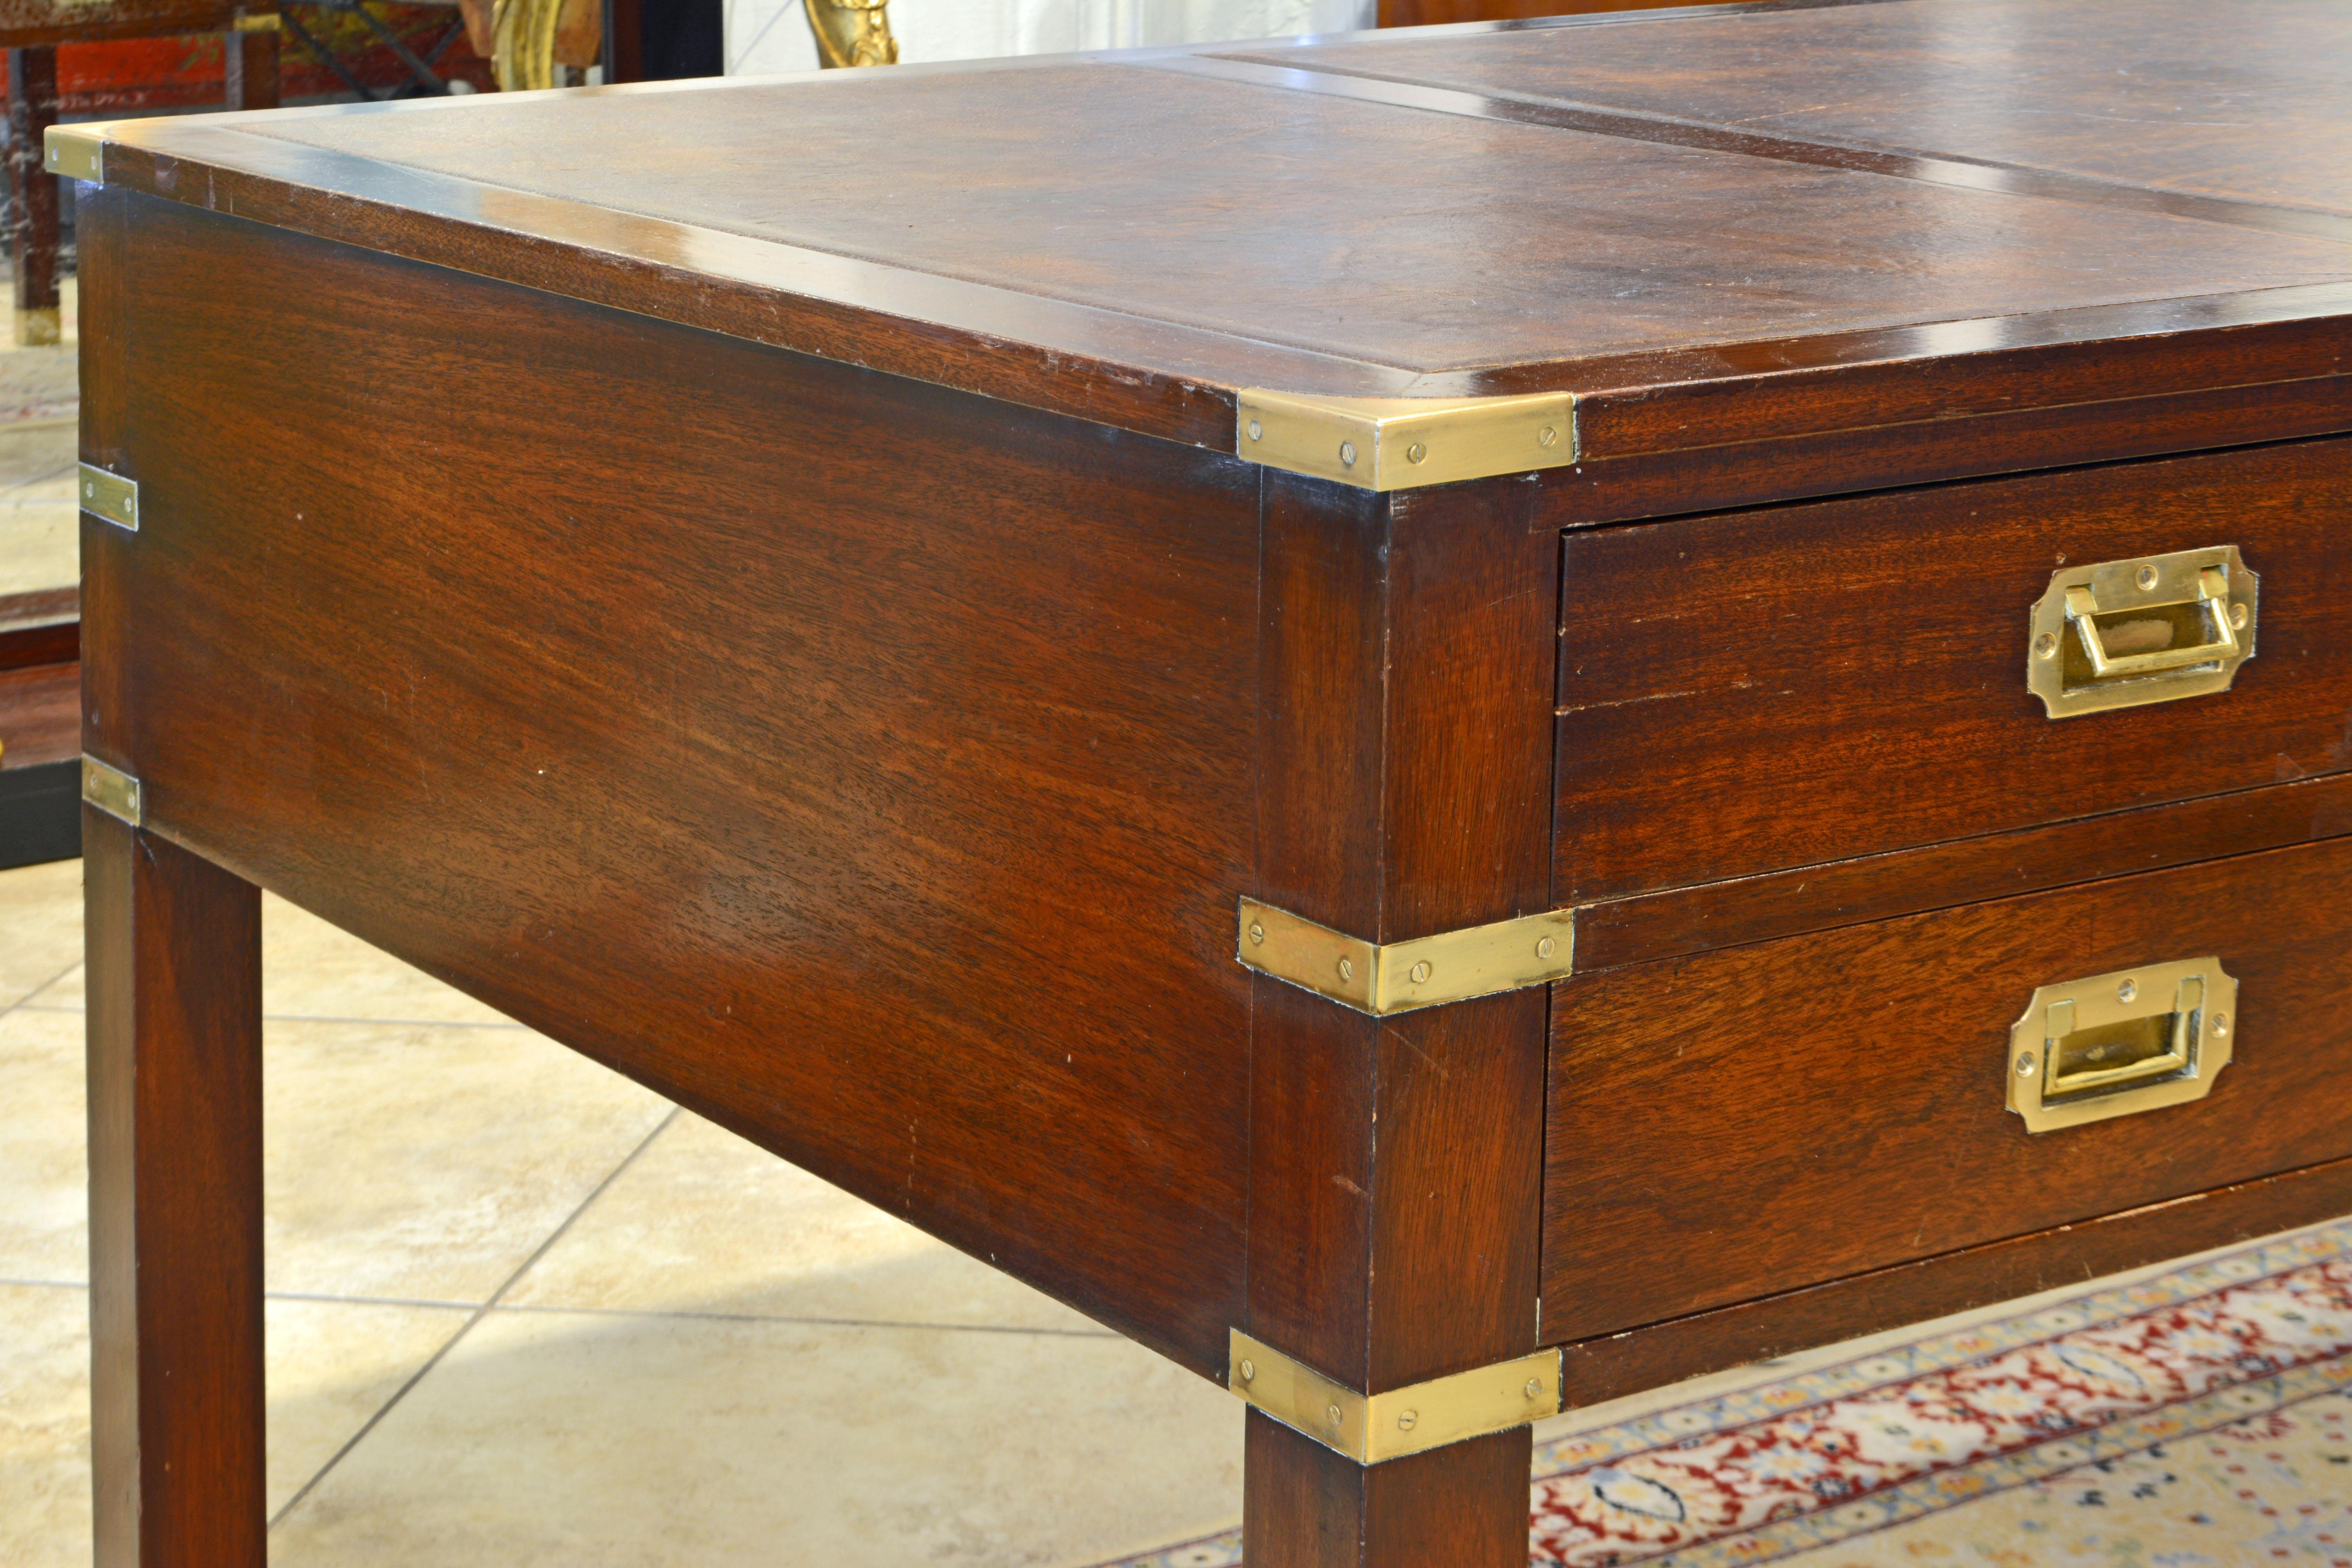 This British Colonial Mahogany campaign style desk features a top with three leather lined panels above five drawers with flush mounted brass handles on one side and simulated drawers on the other. The joints are accented by flush mounted brass